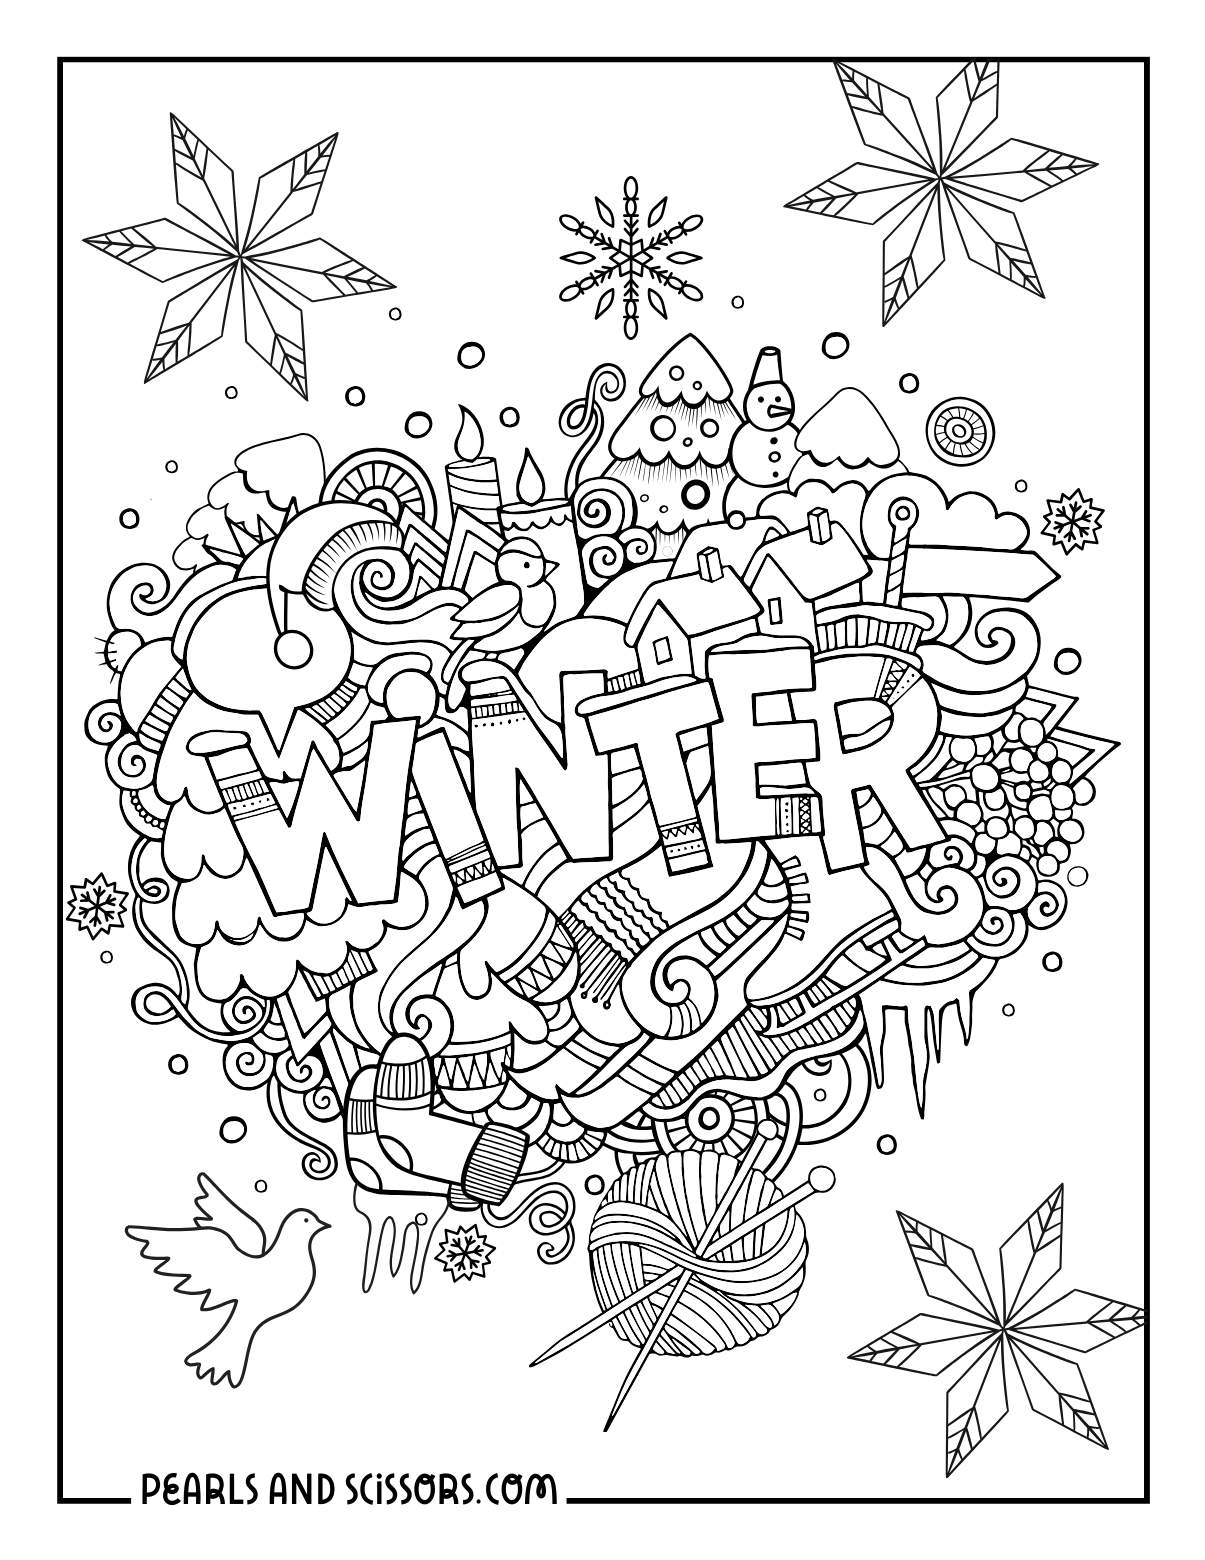 Winter doodle coloring page for adults.